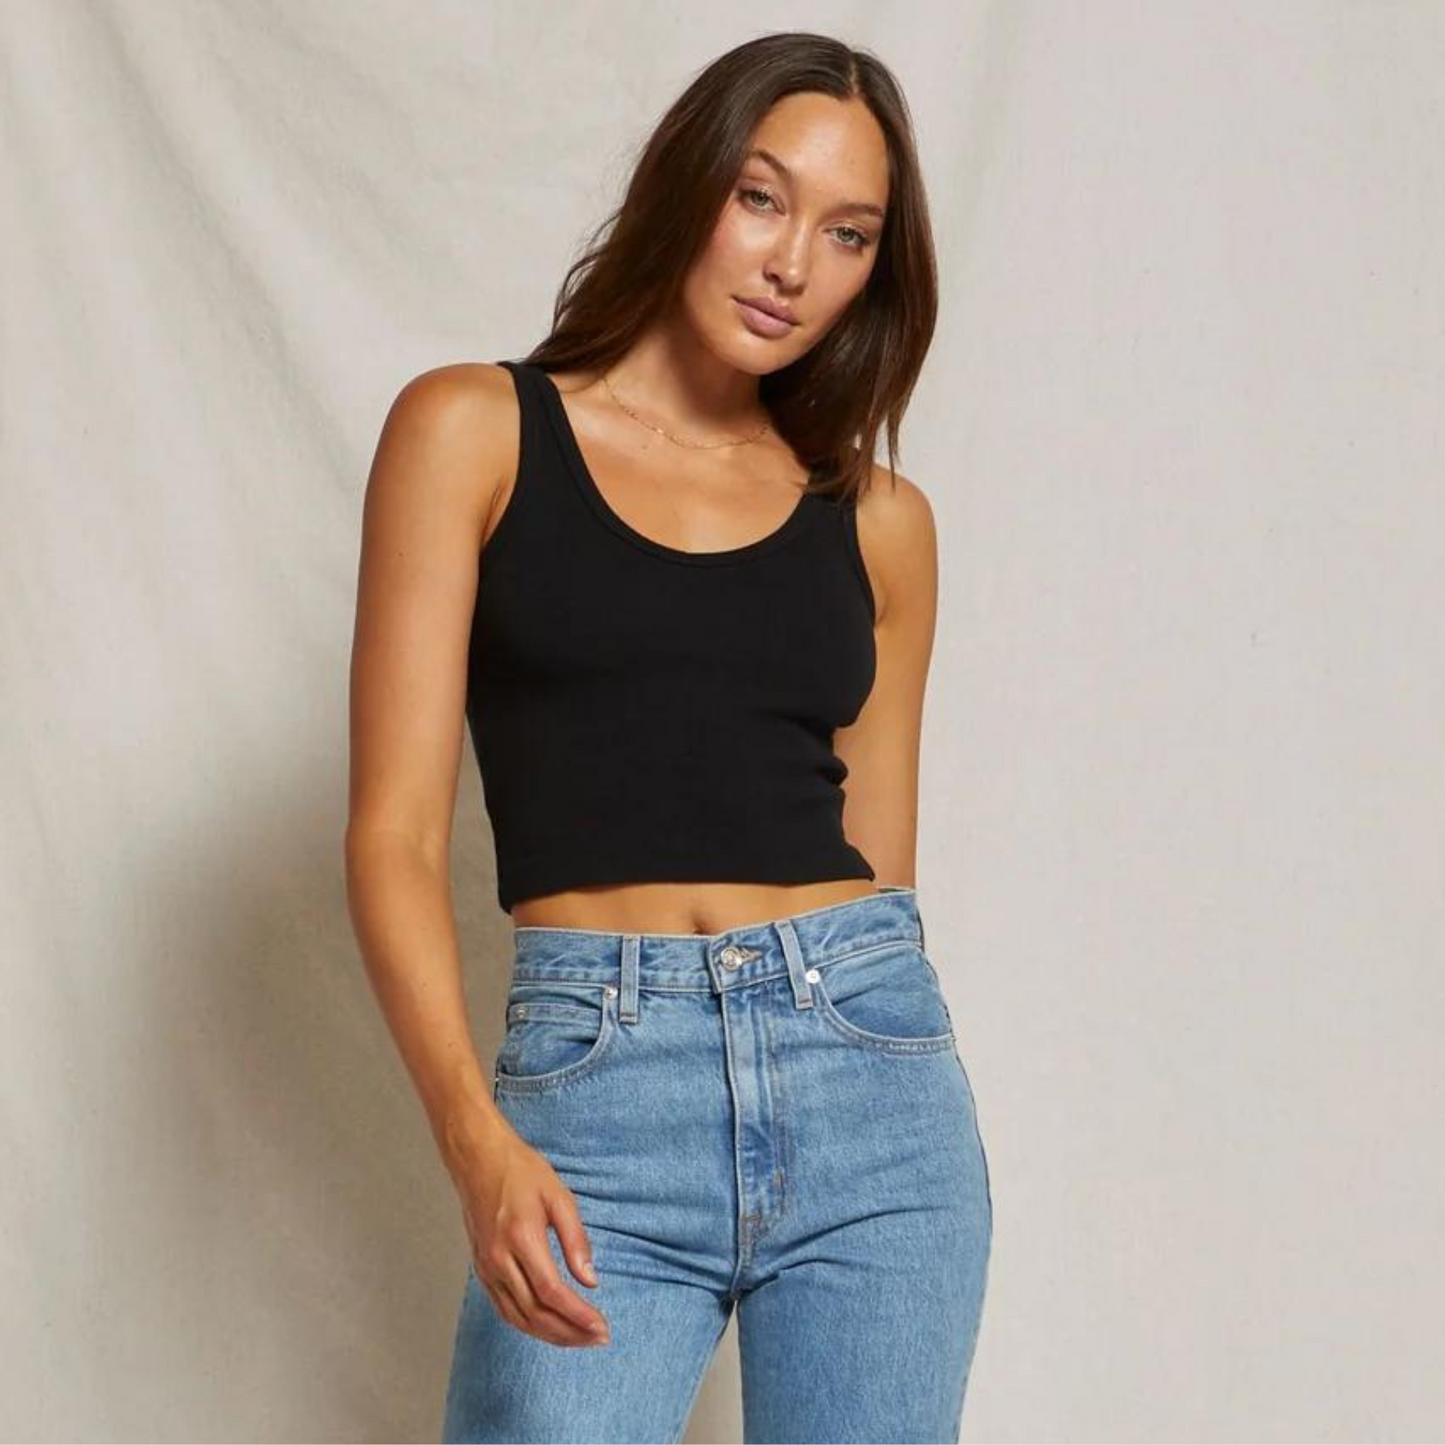 Perfect White Tee's Daisy Cropped Layering Tank in the color True Black